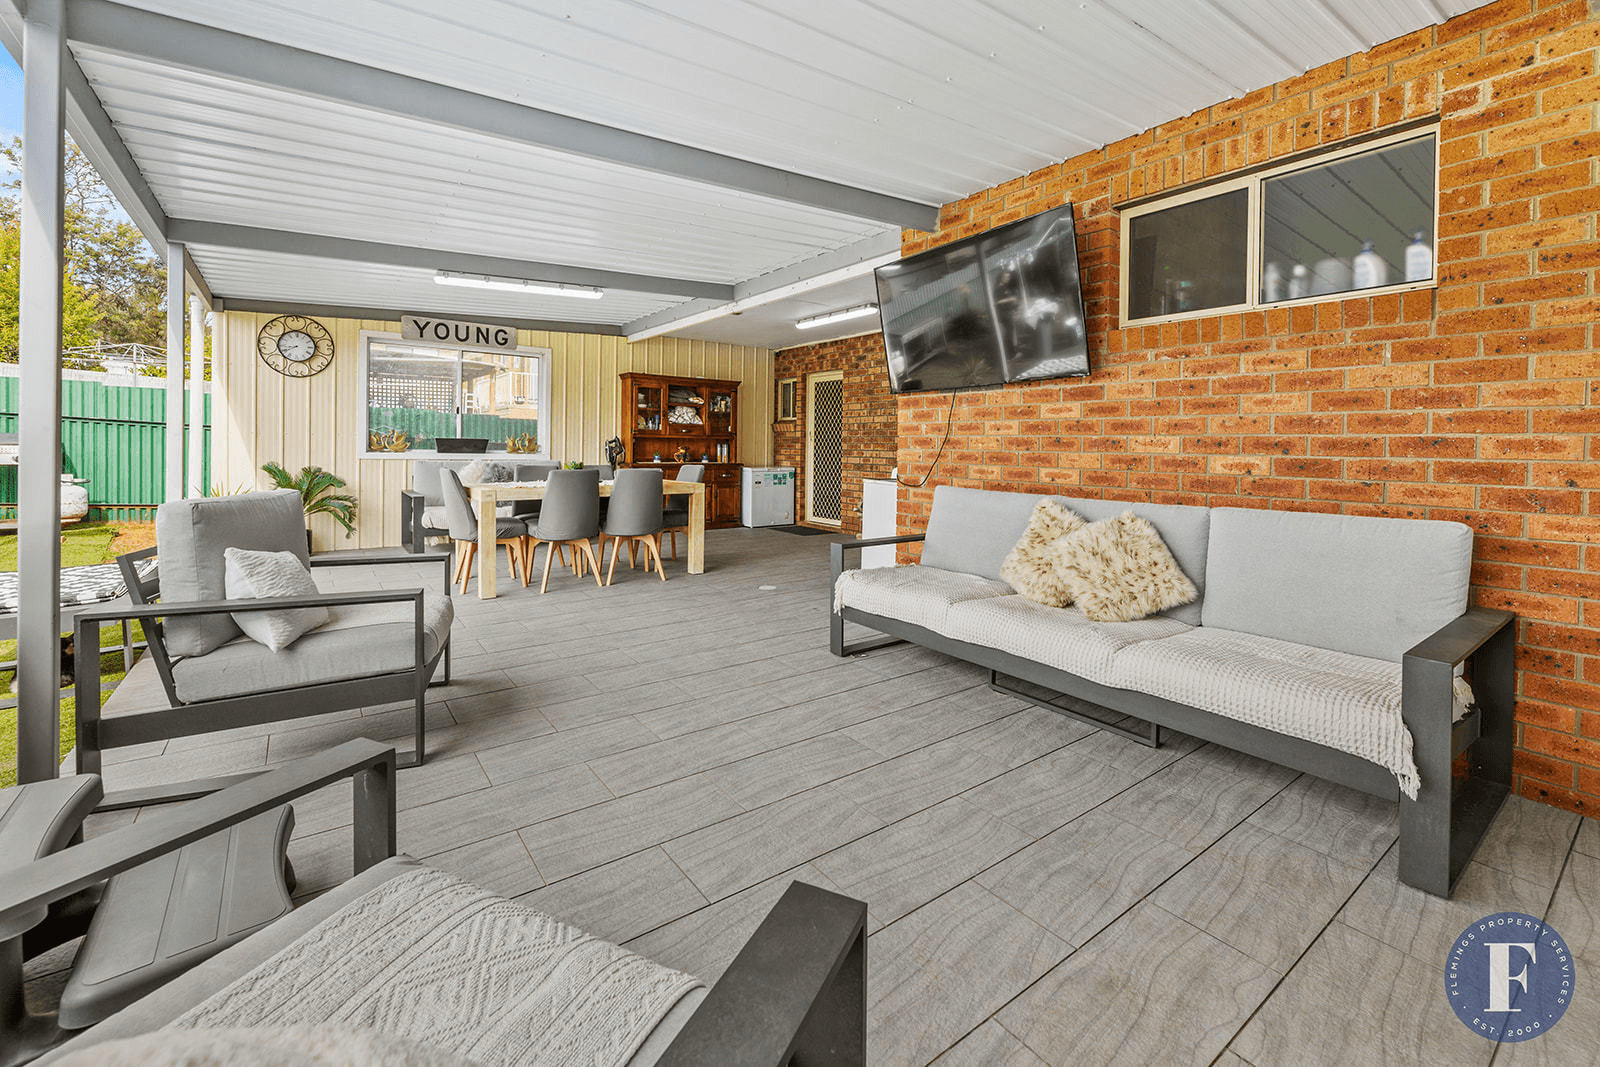 34 Taylor Road, Young, NSW 2594